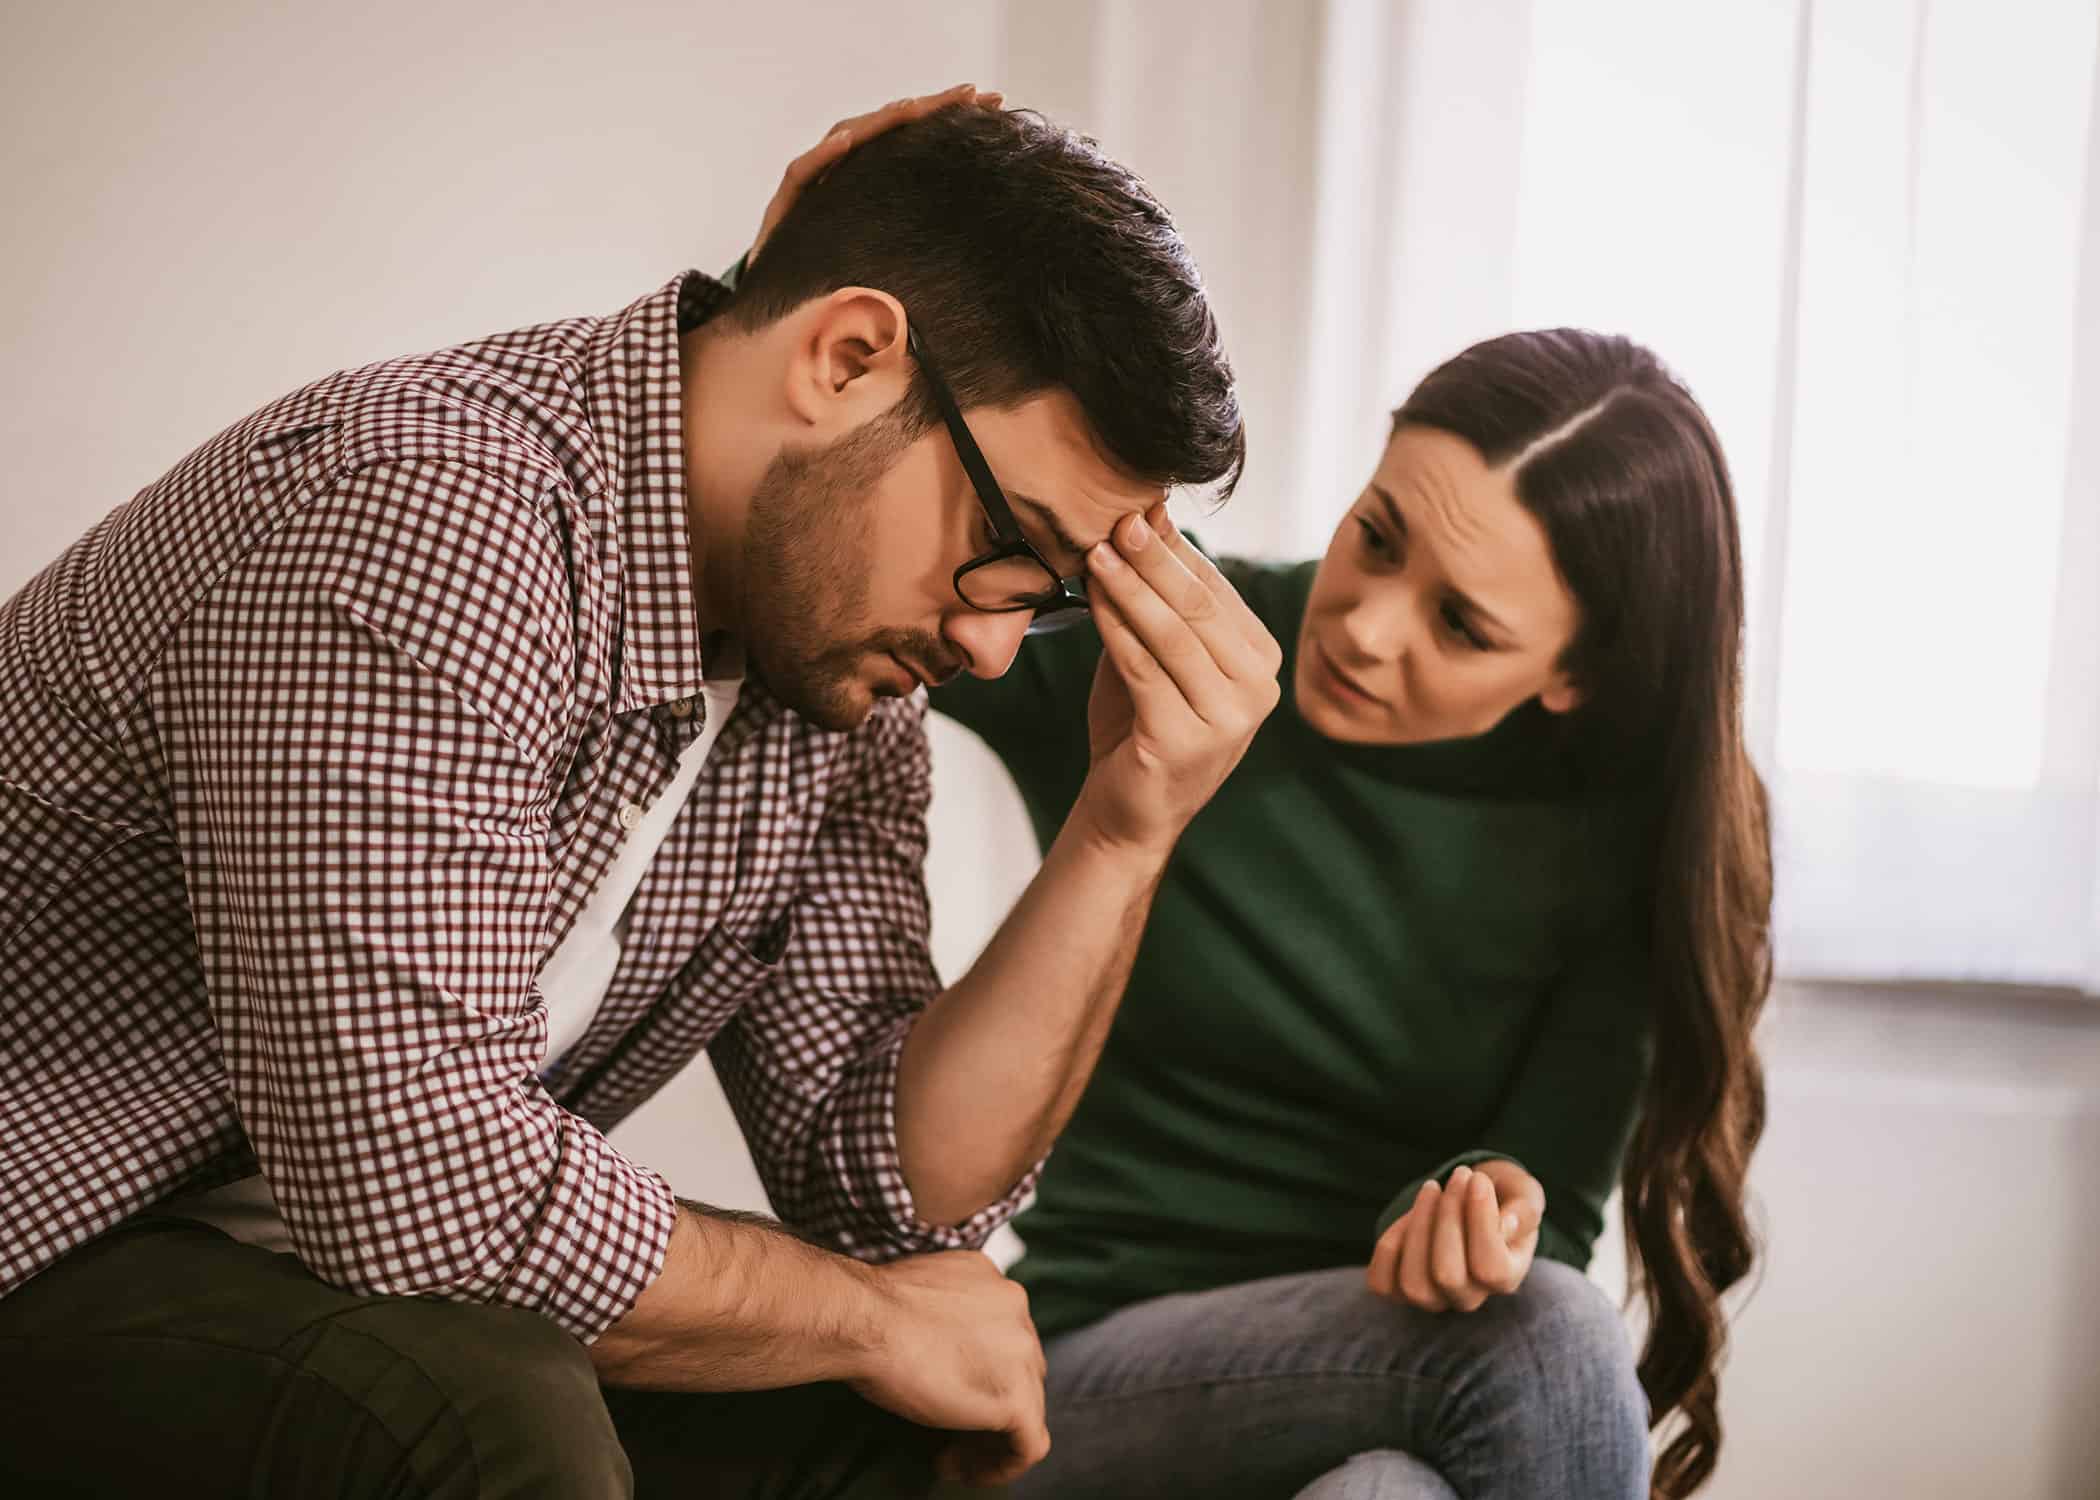 Xxx10 Yoers Hindi - Warning Signs that Your Spouse Has Mental Health Issues - Focus on the  Family